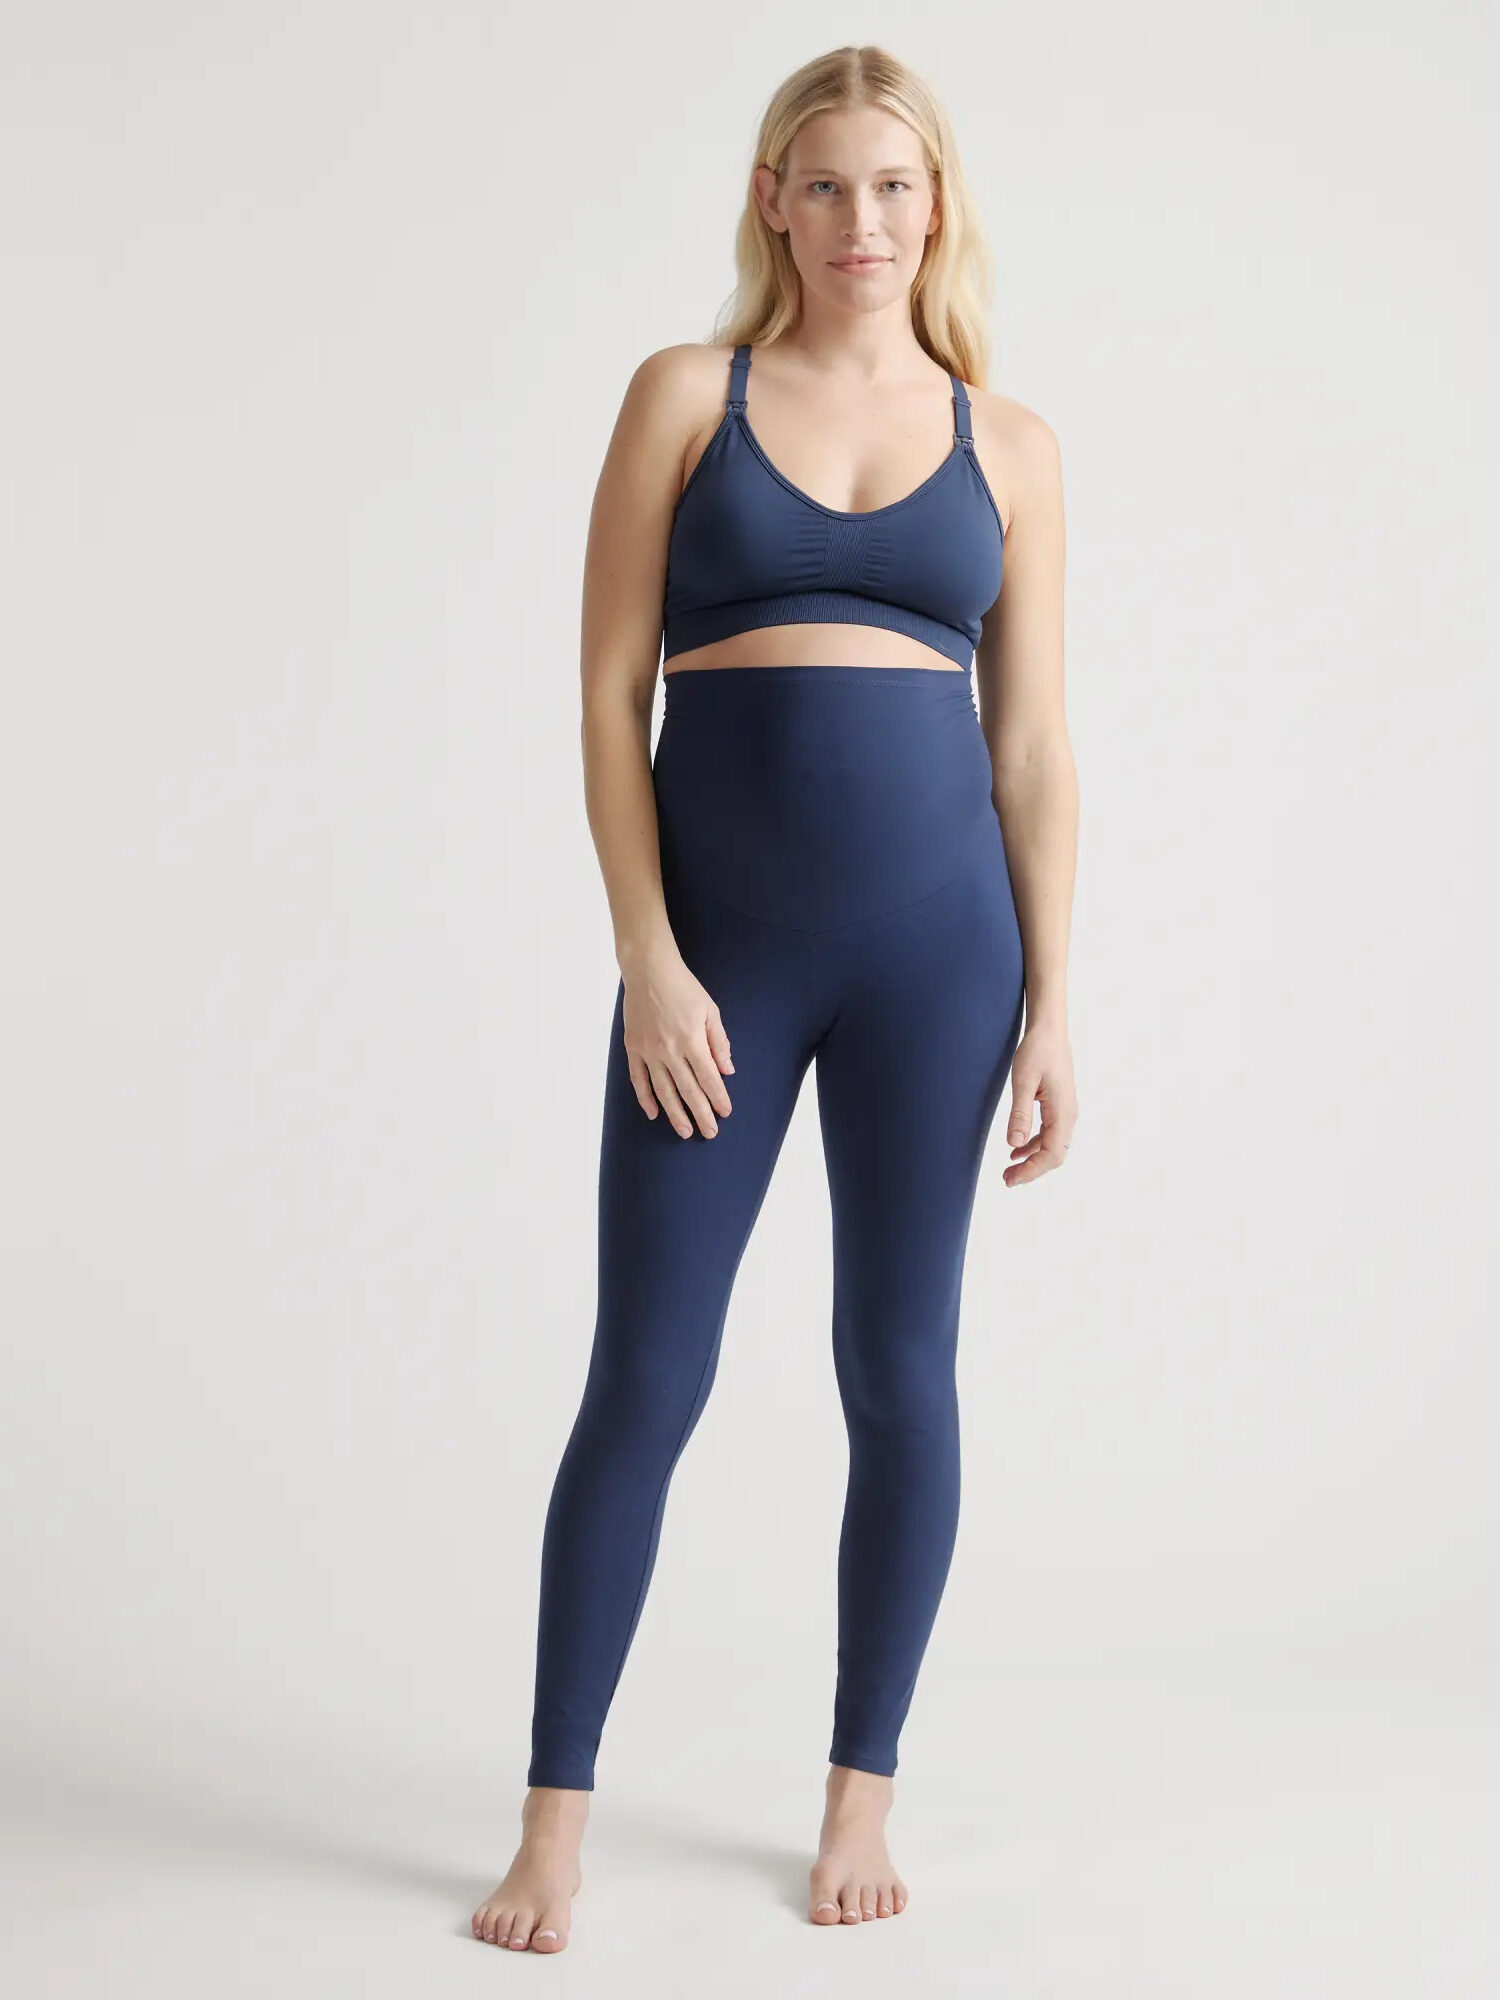 A model wearing Quince's navy organic maternity leggings.